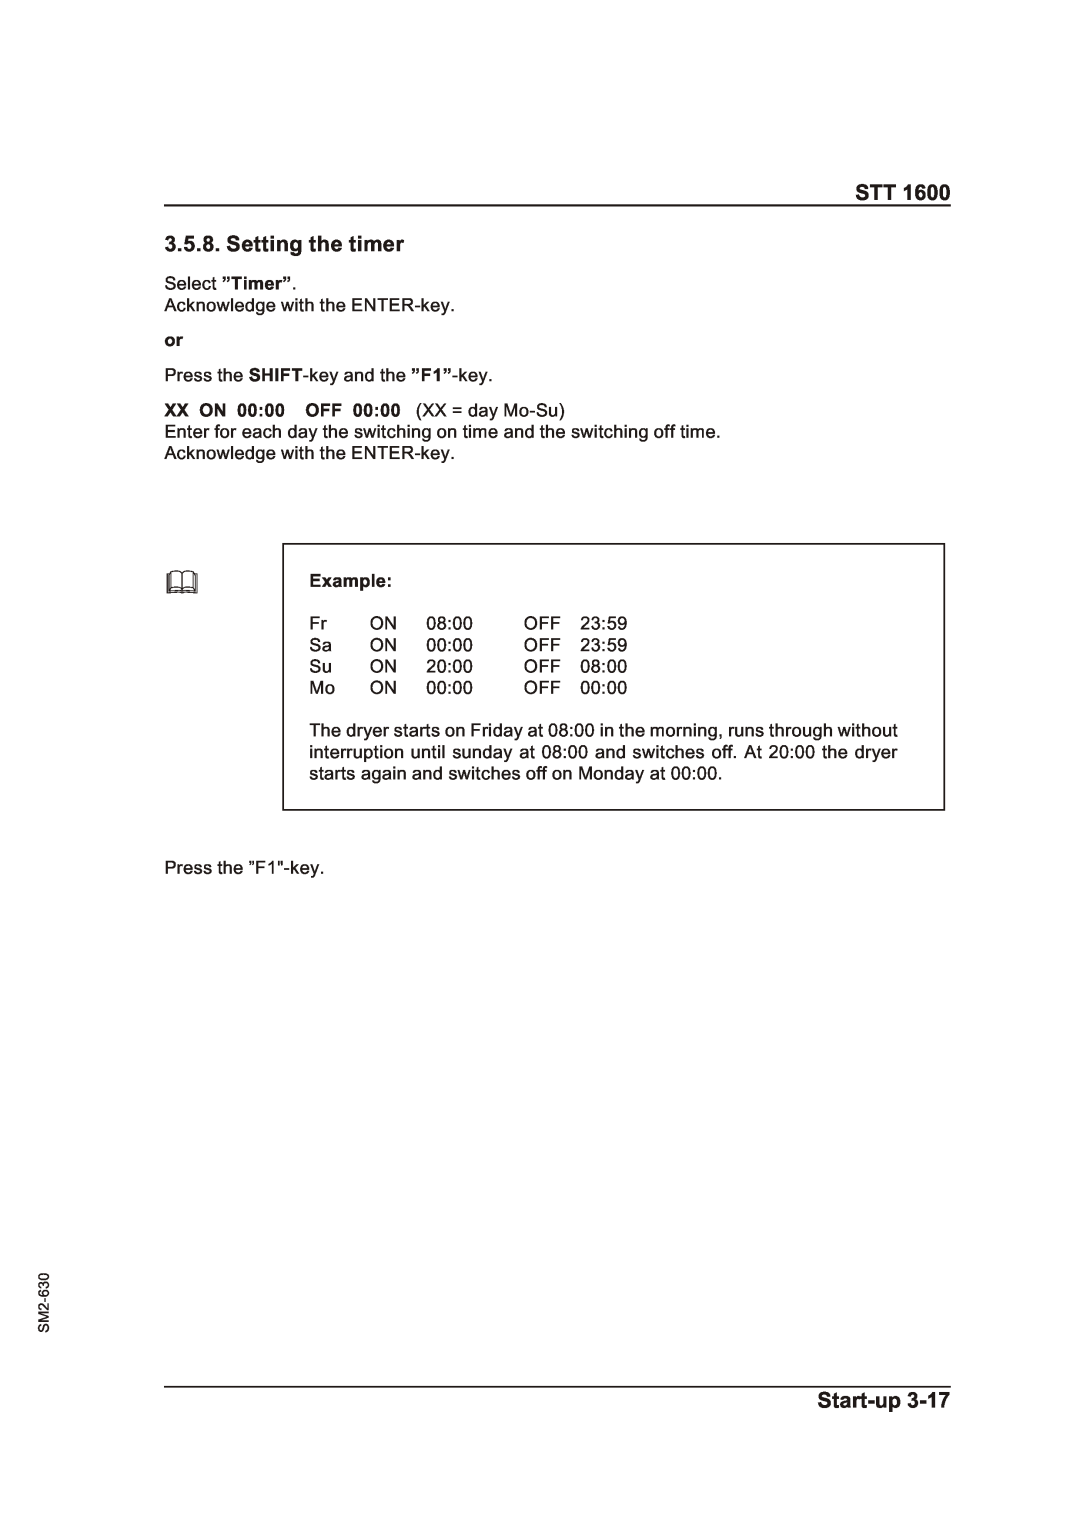 Sterling STT 1600 operating instructions STT 3.5.8. Setting the timer, Start-up, XX ON 00 00 OFF 00 00 XX = day Mo-Su 